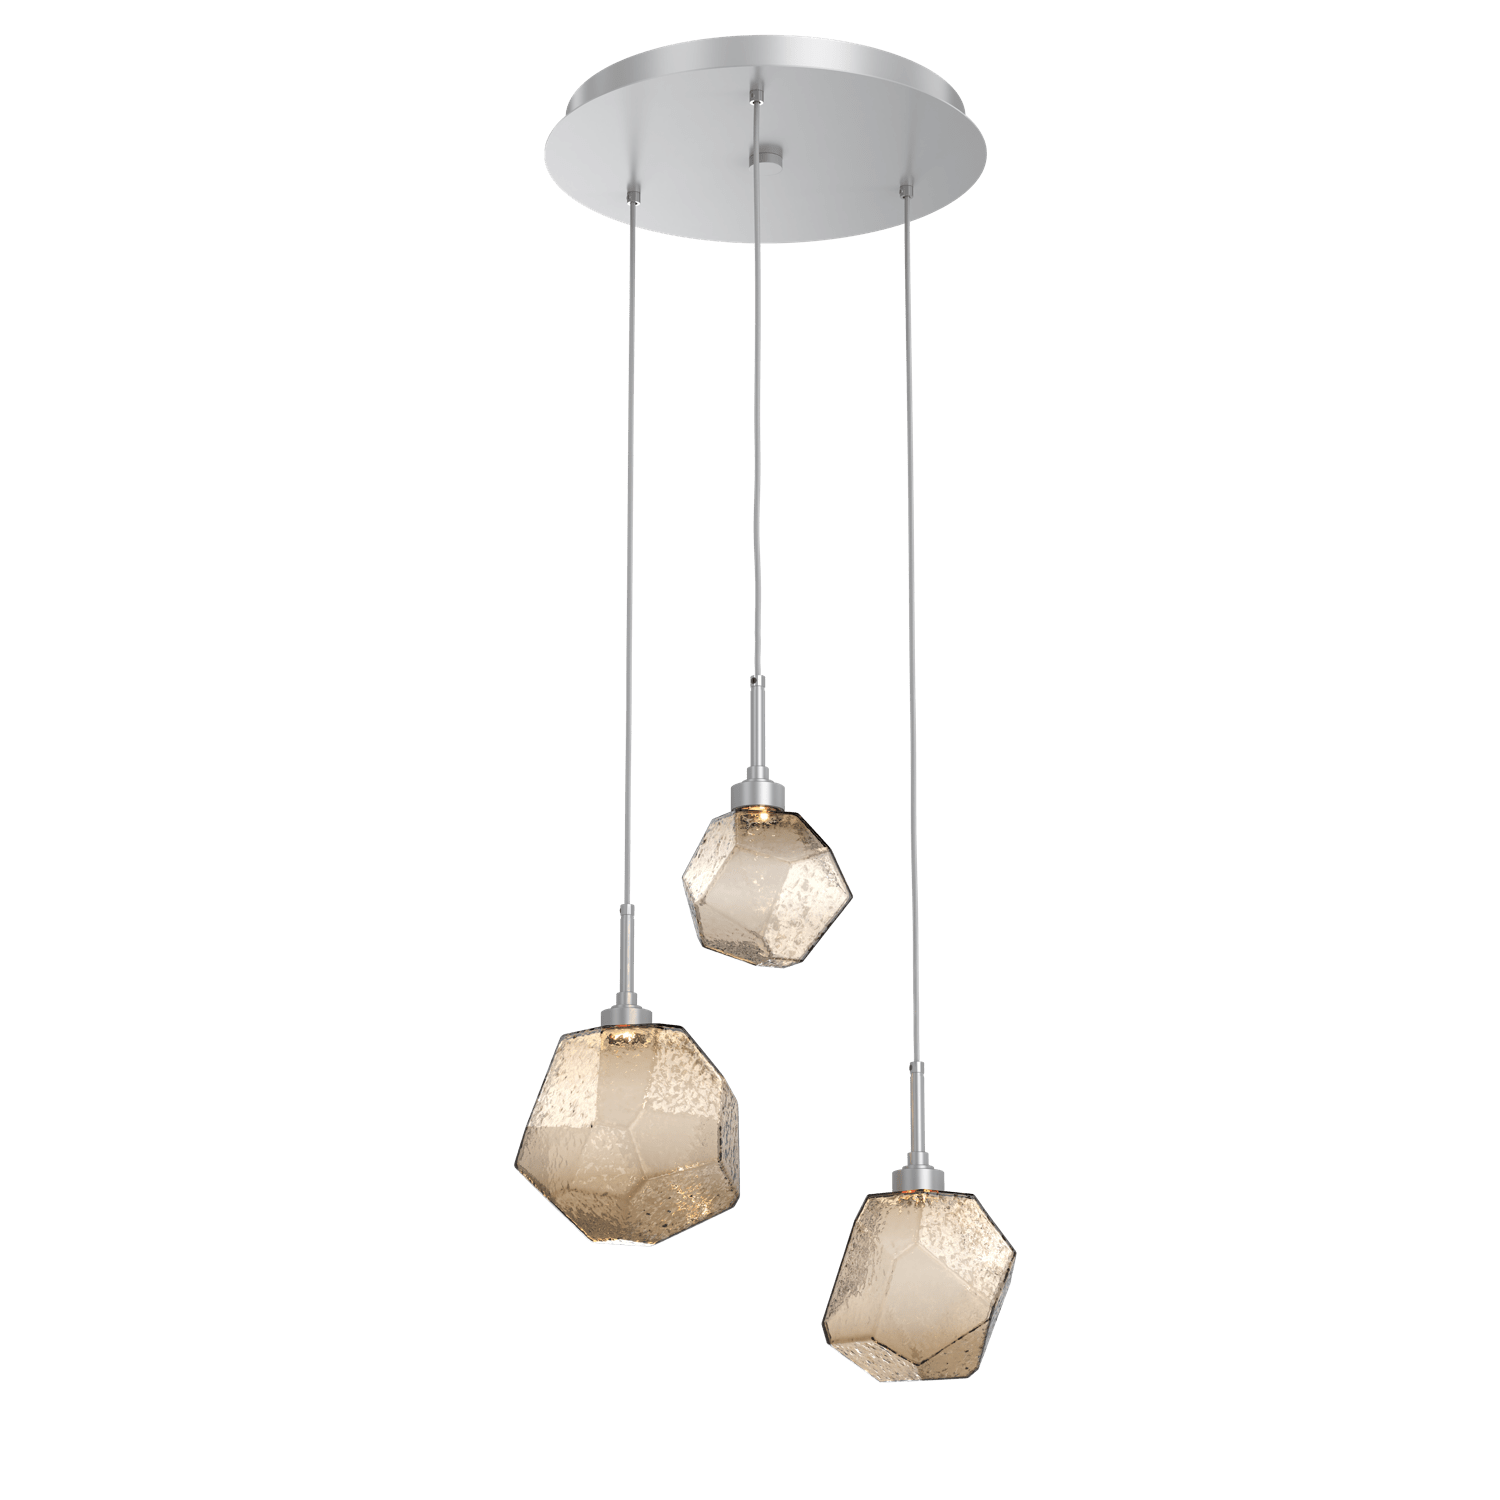 CHB0039-03-CS-B-Hammerton-Studio-Gem-3-light-round-pendant-chandelier-with-classic-silver-finish-and-bronze-blown-glass-shades-and-LED-lamping